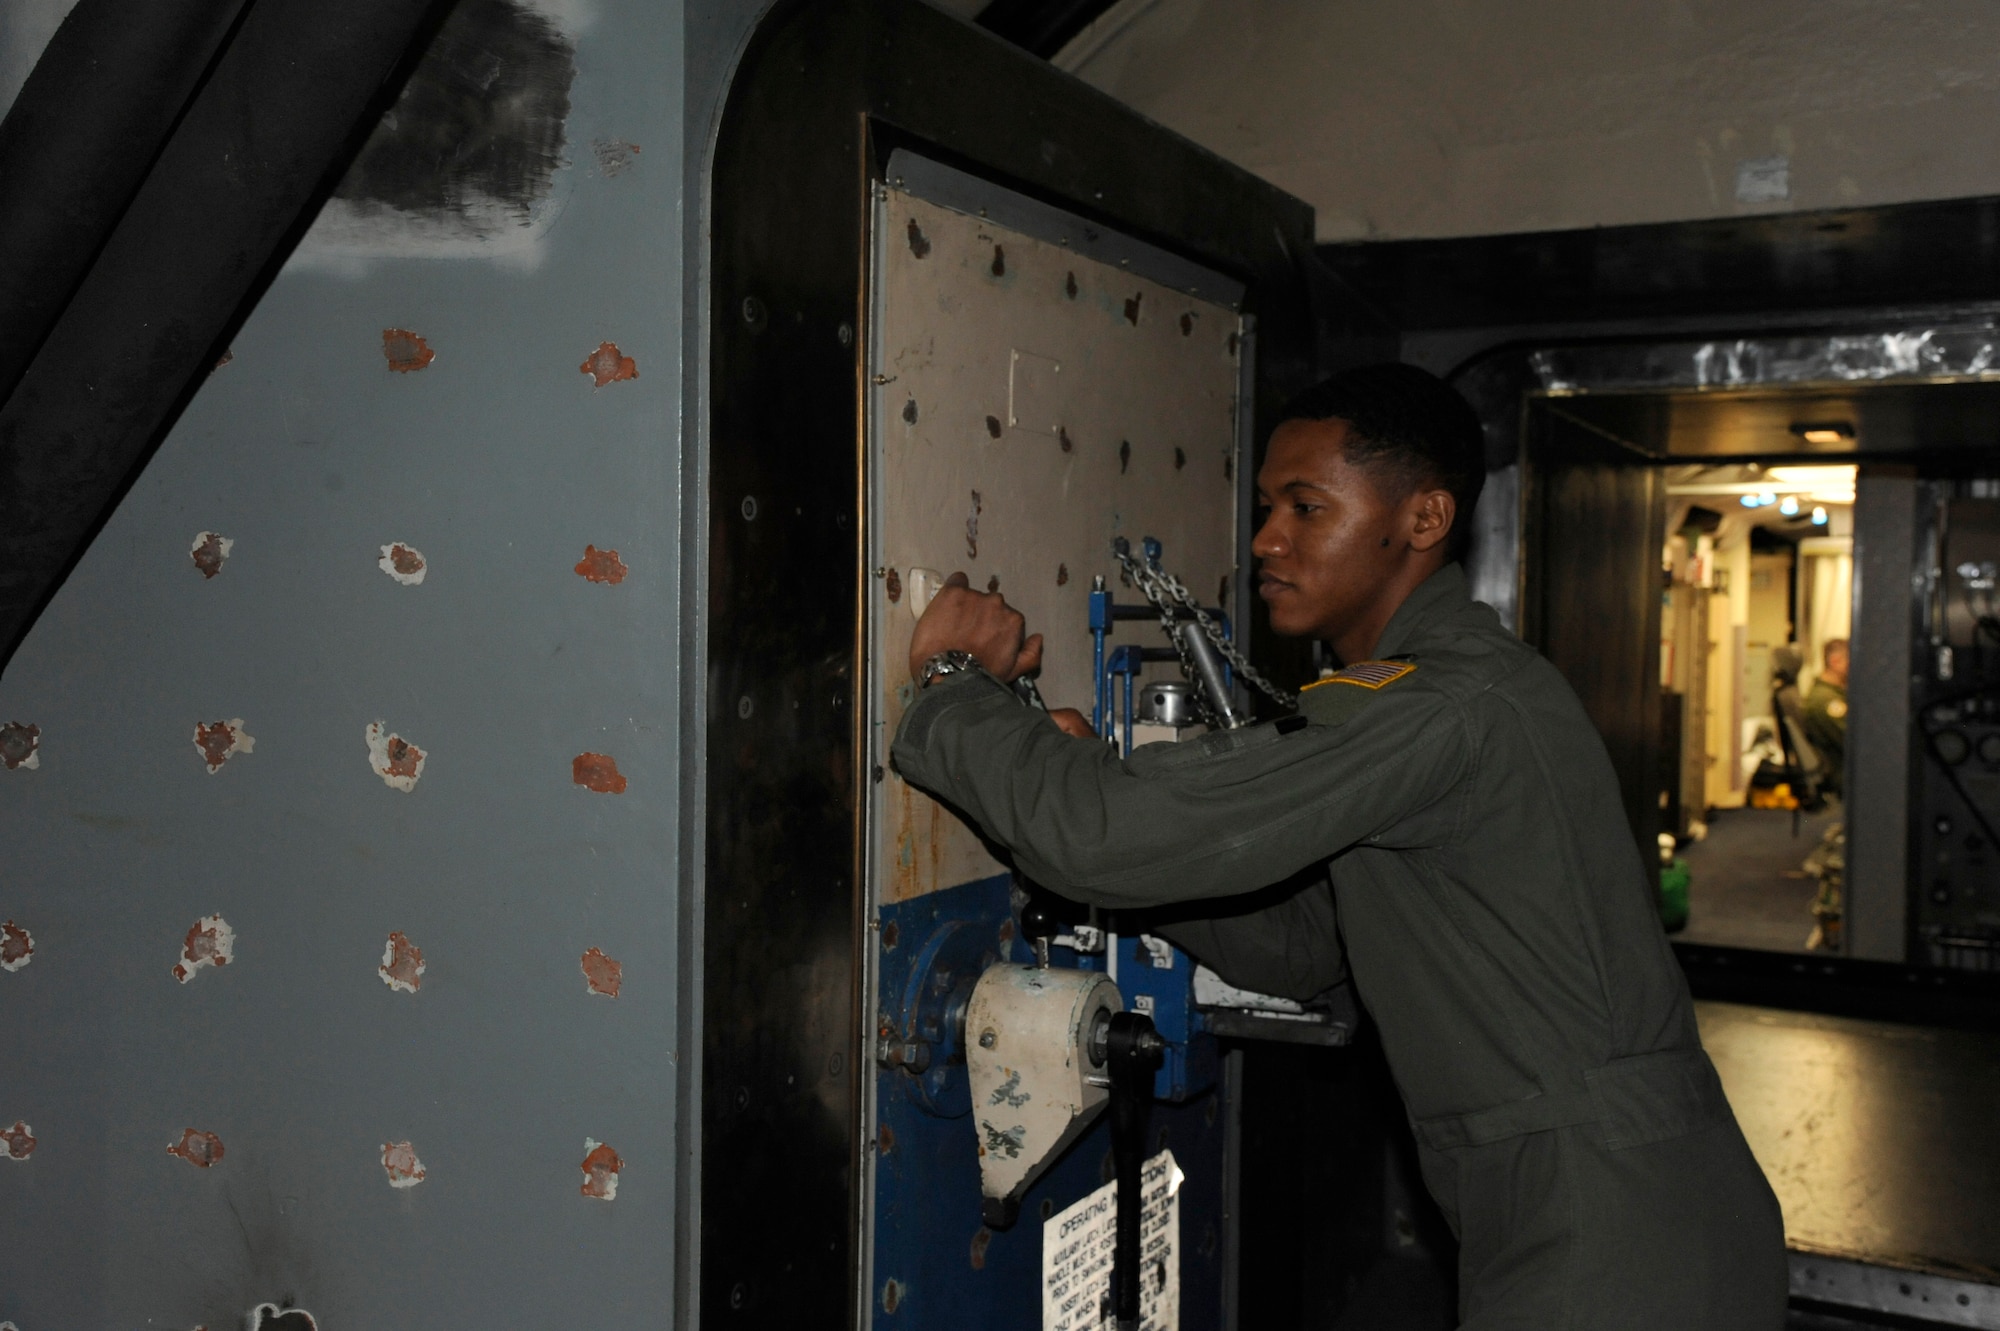 Capt. Javon Quarles, 321st Missile Squadron mission combat crew commander, pulls the blast door to the capsule closed during his second alert as an individual mobilization augmentee. Quarles served 4 years on active duty with the 321st MS and transitioned into the Air Force Reserve earlier this year.  (U. S. Air Force photo by Glenn S. Robertson)